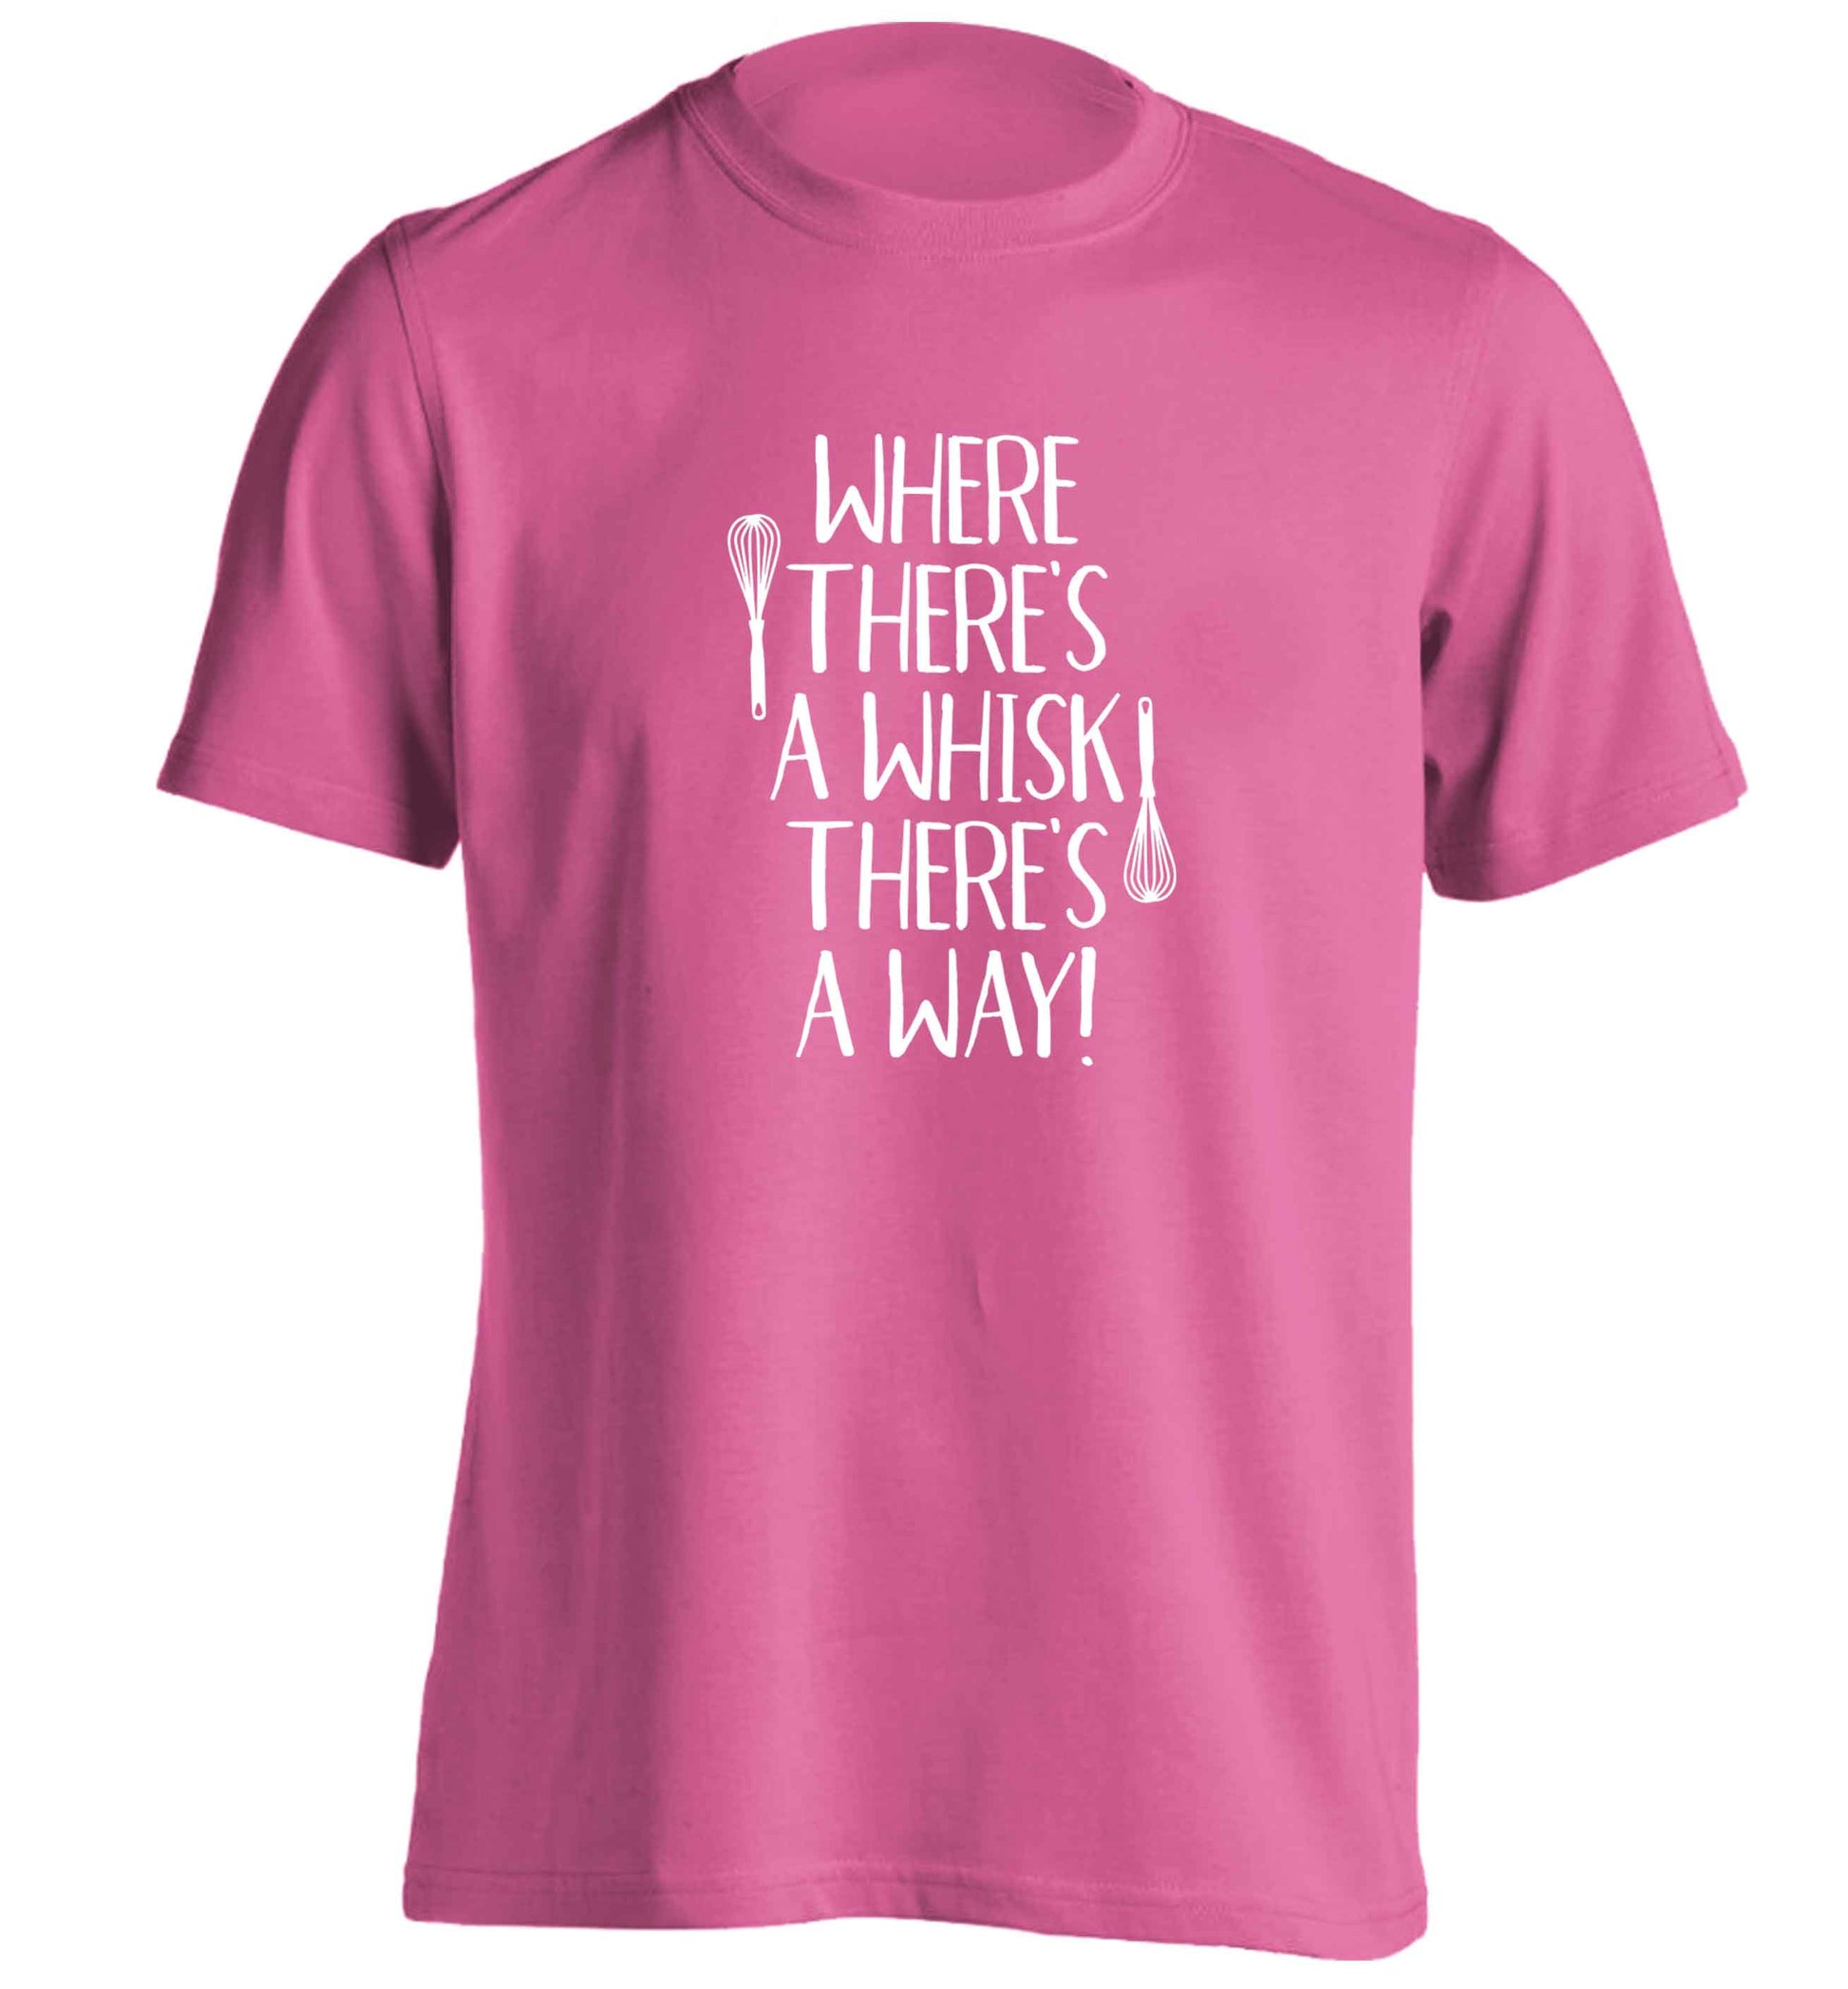 Where there's a whisk there's a way adults unisex pink Tshirt 2XL